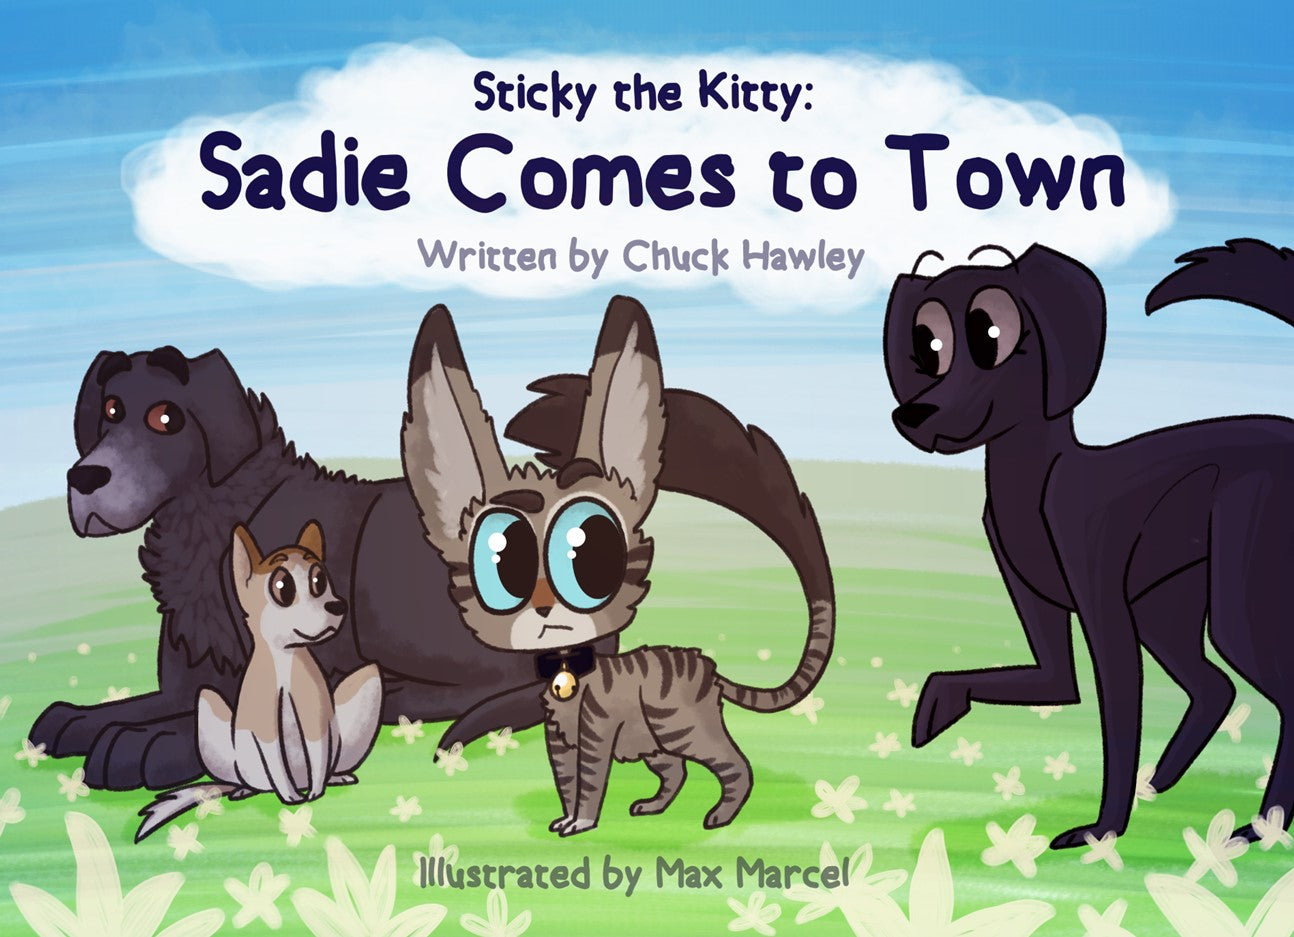 Sticky's Storytime Soiree: 3 Award-Winning ESL Hardcover Children's Books with Stuffed Sticky AND a stuffed SADIE!